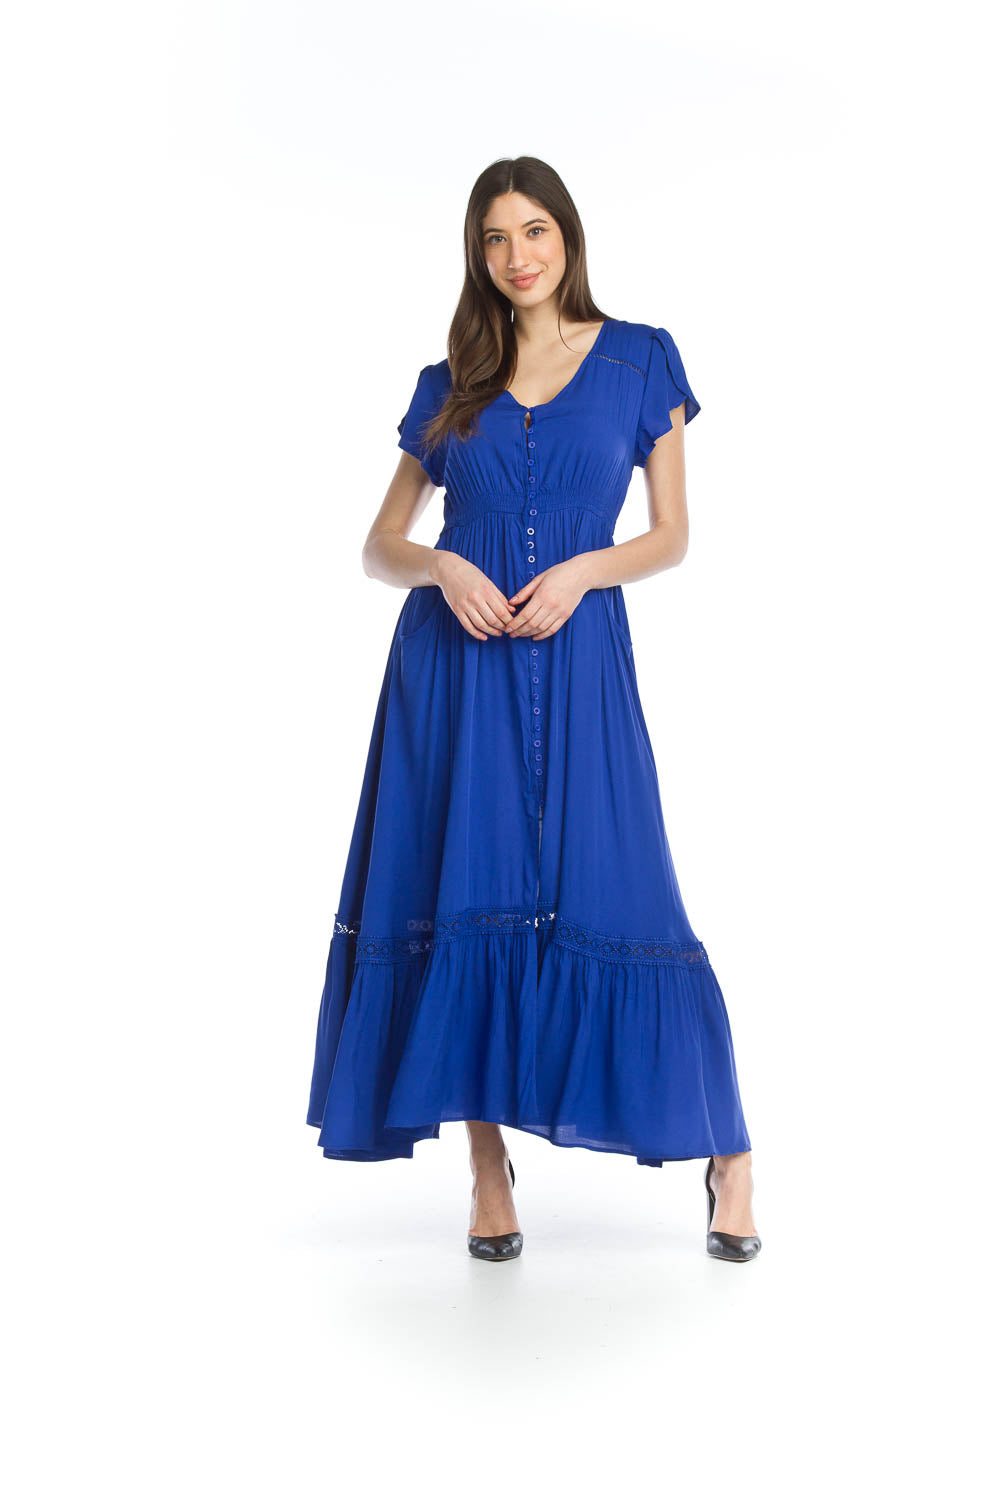 Button Front Maxi Dress with Pockets